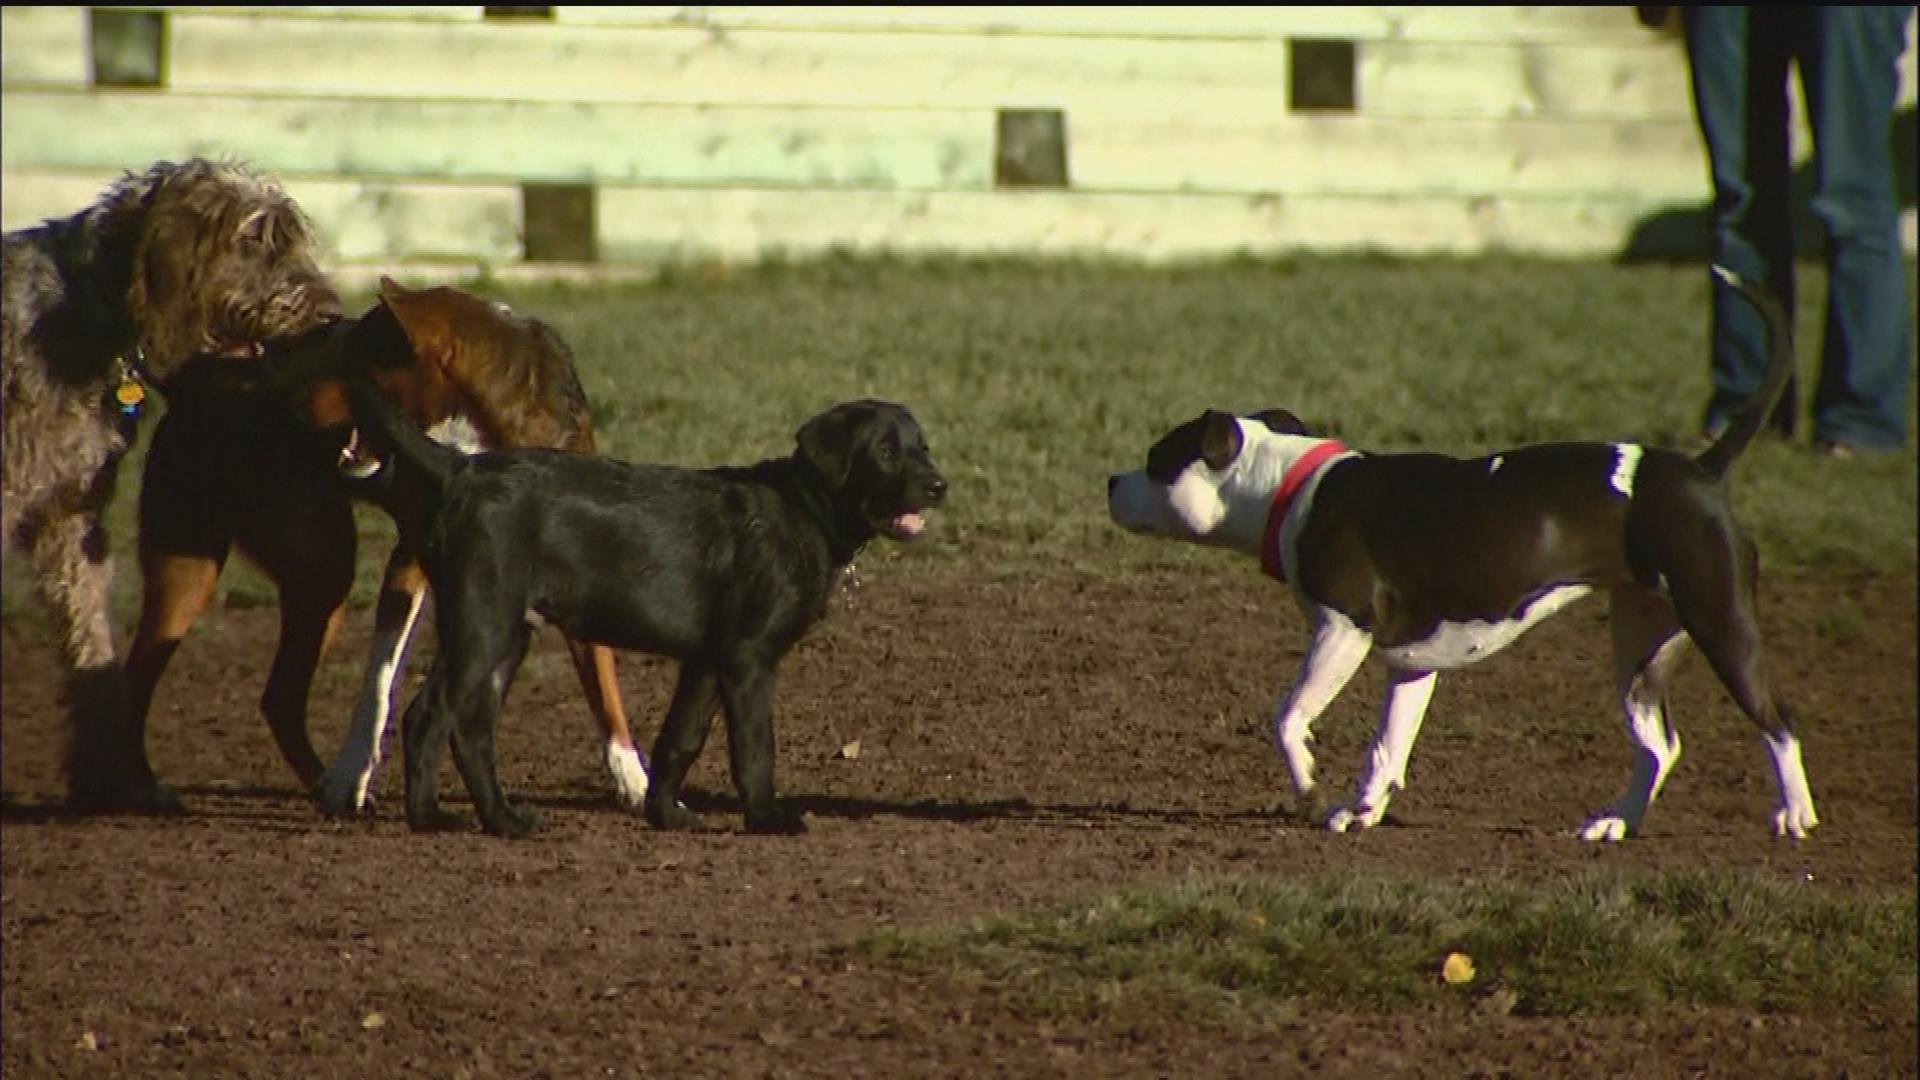 Dogs at a park in Breckenridge (credit: CBS)